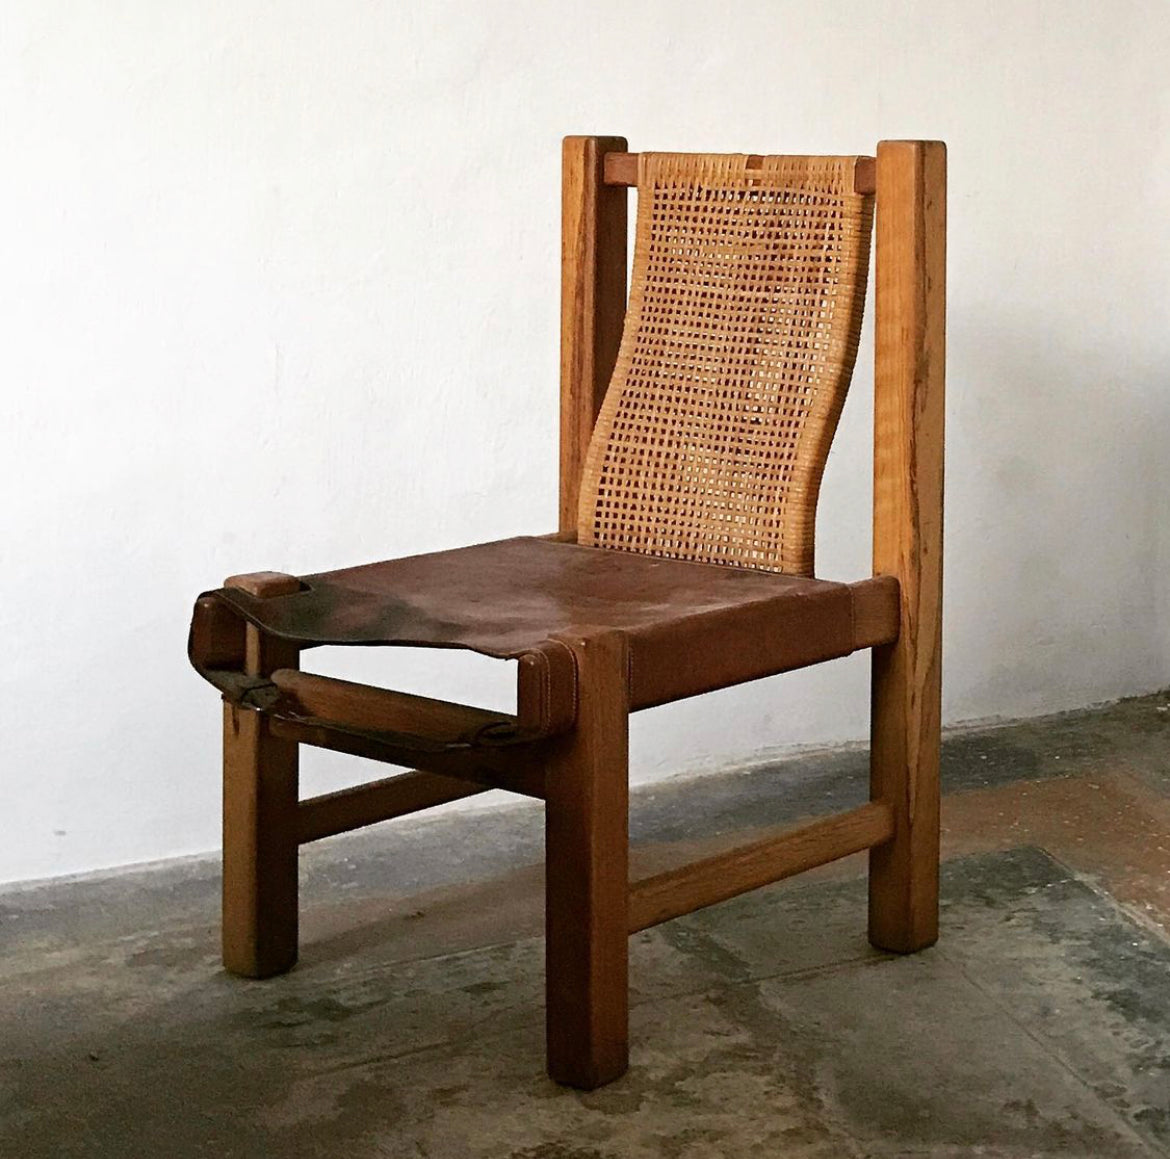 Lander Wood and Leather Chair c 1970